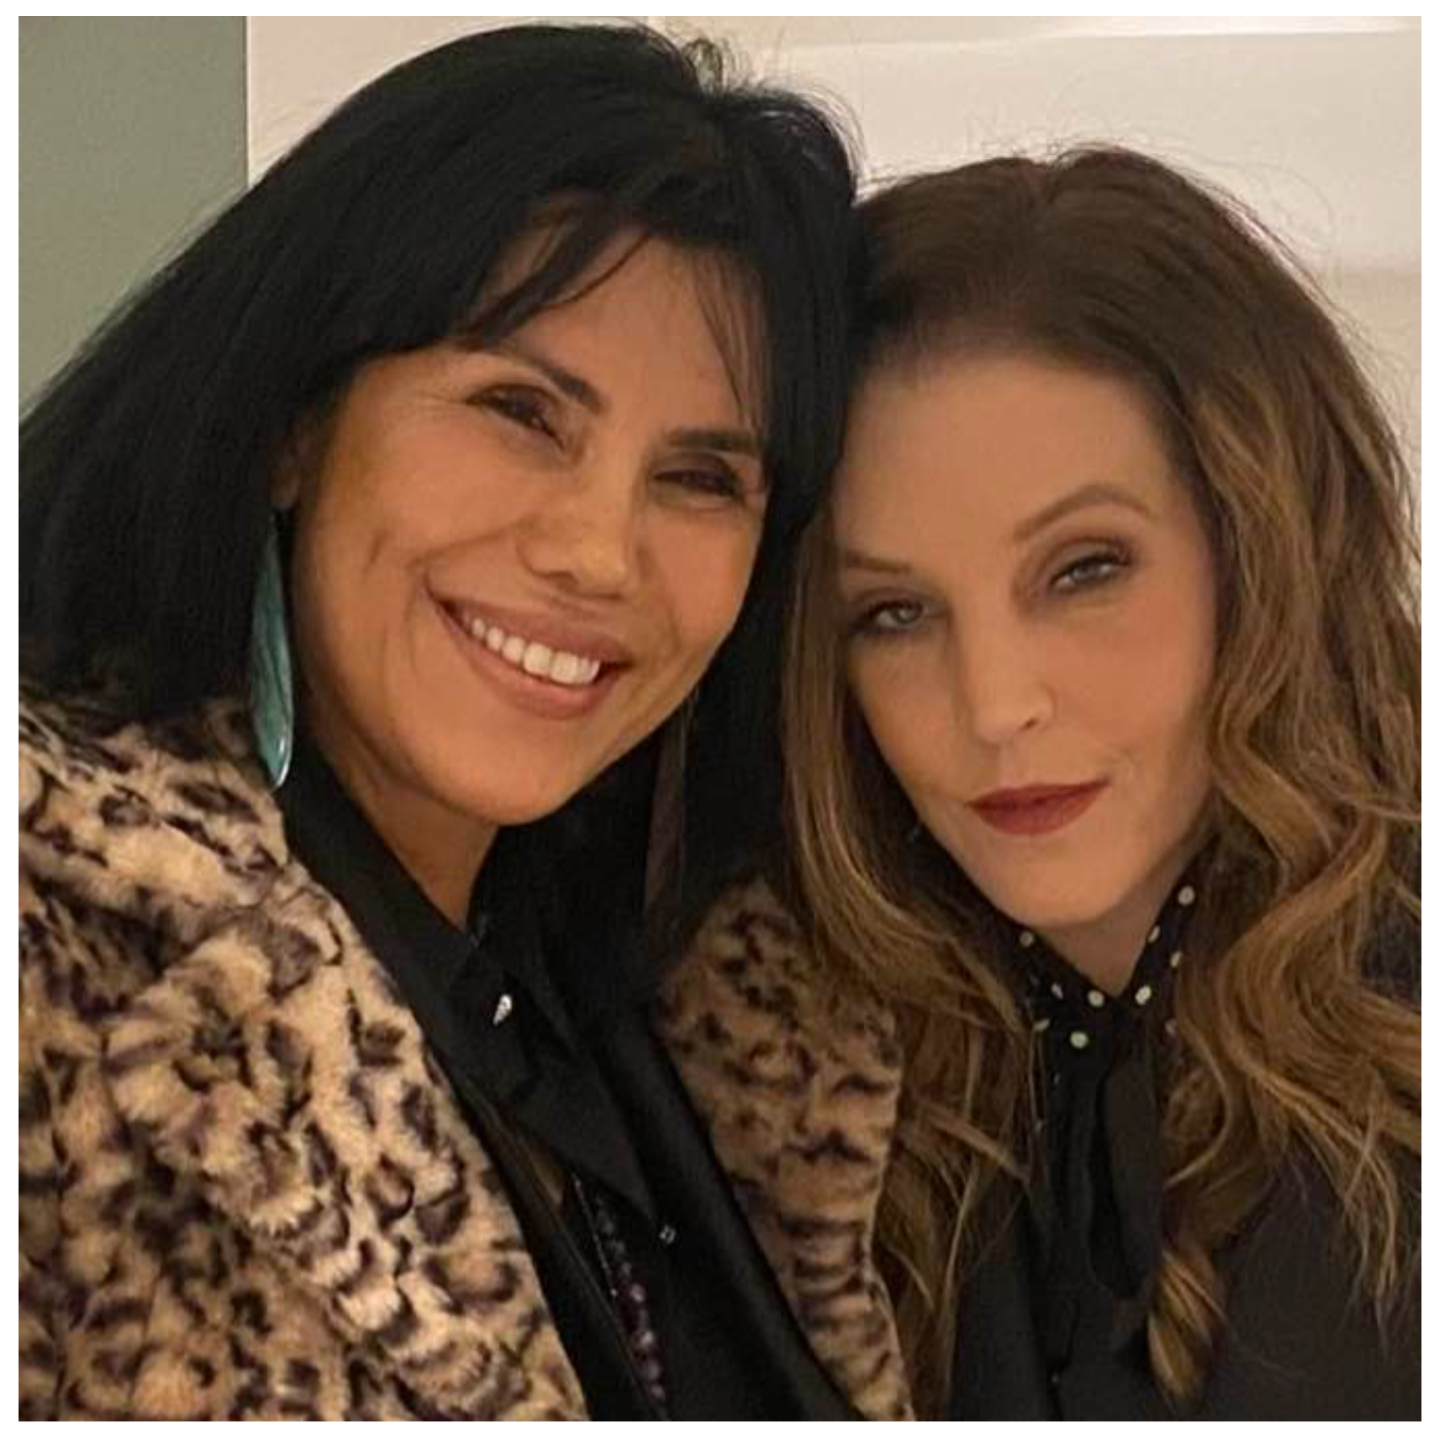 Stunning Regret About Lisa Marie Presley’s Death – ‘I Wish I Told Her I Was 41 Years Sober,’ Family Friend Reveals [Exclusive]